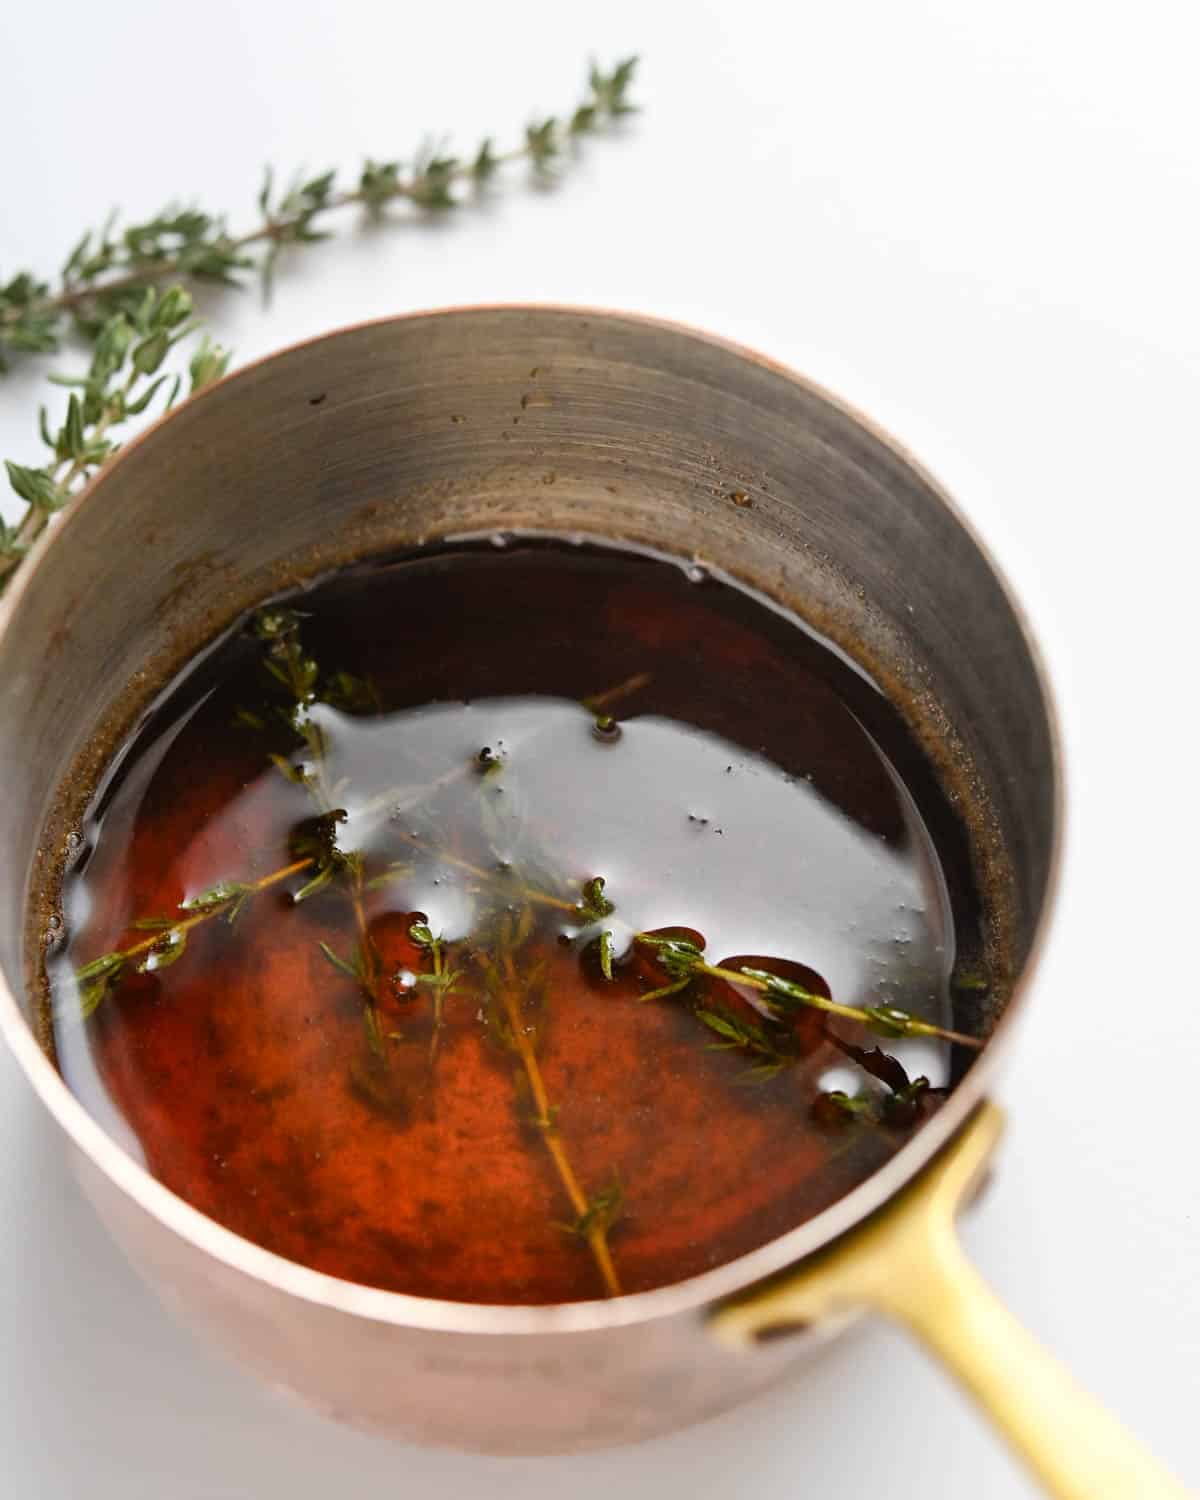 Making the thyme-infused simple syrup.